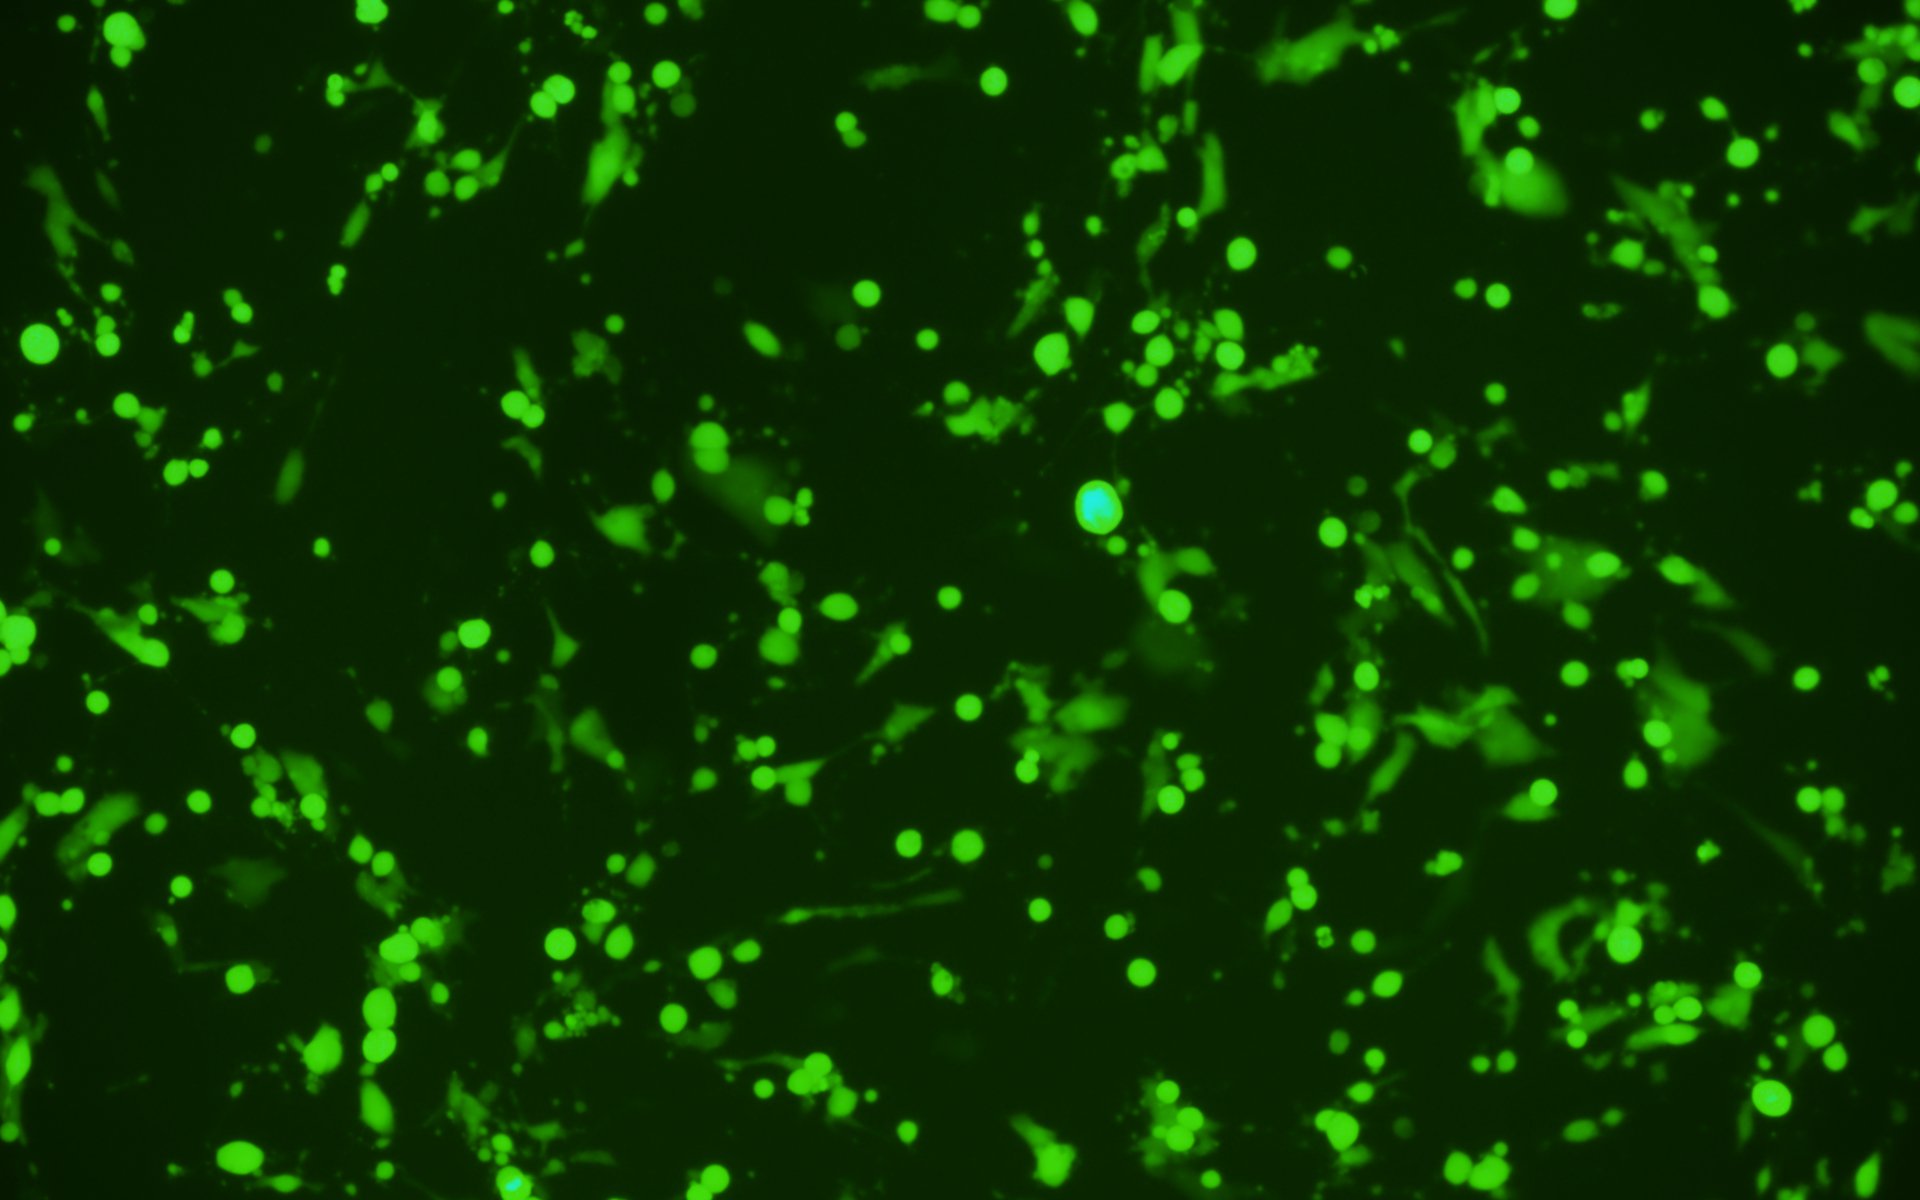 BHK-21-ACE2 cells were infected by SARS-CoV-2 S - pseudotyped VSV and presented strong EGFP fluorescent signal.